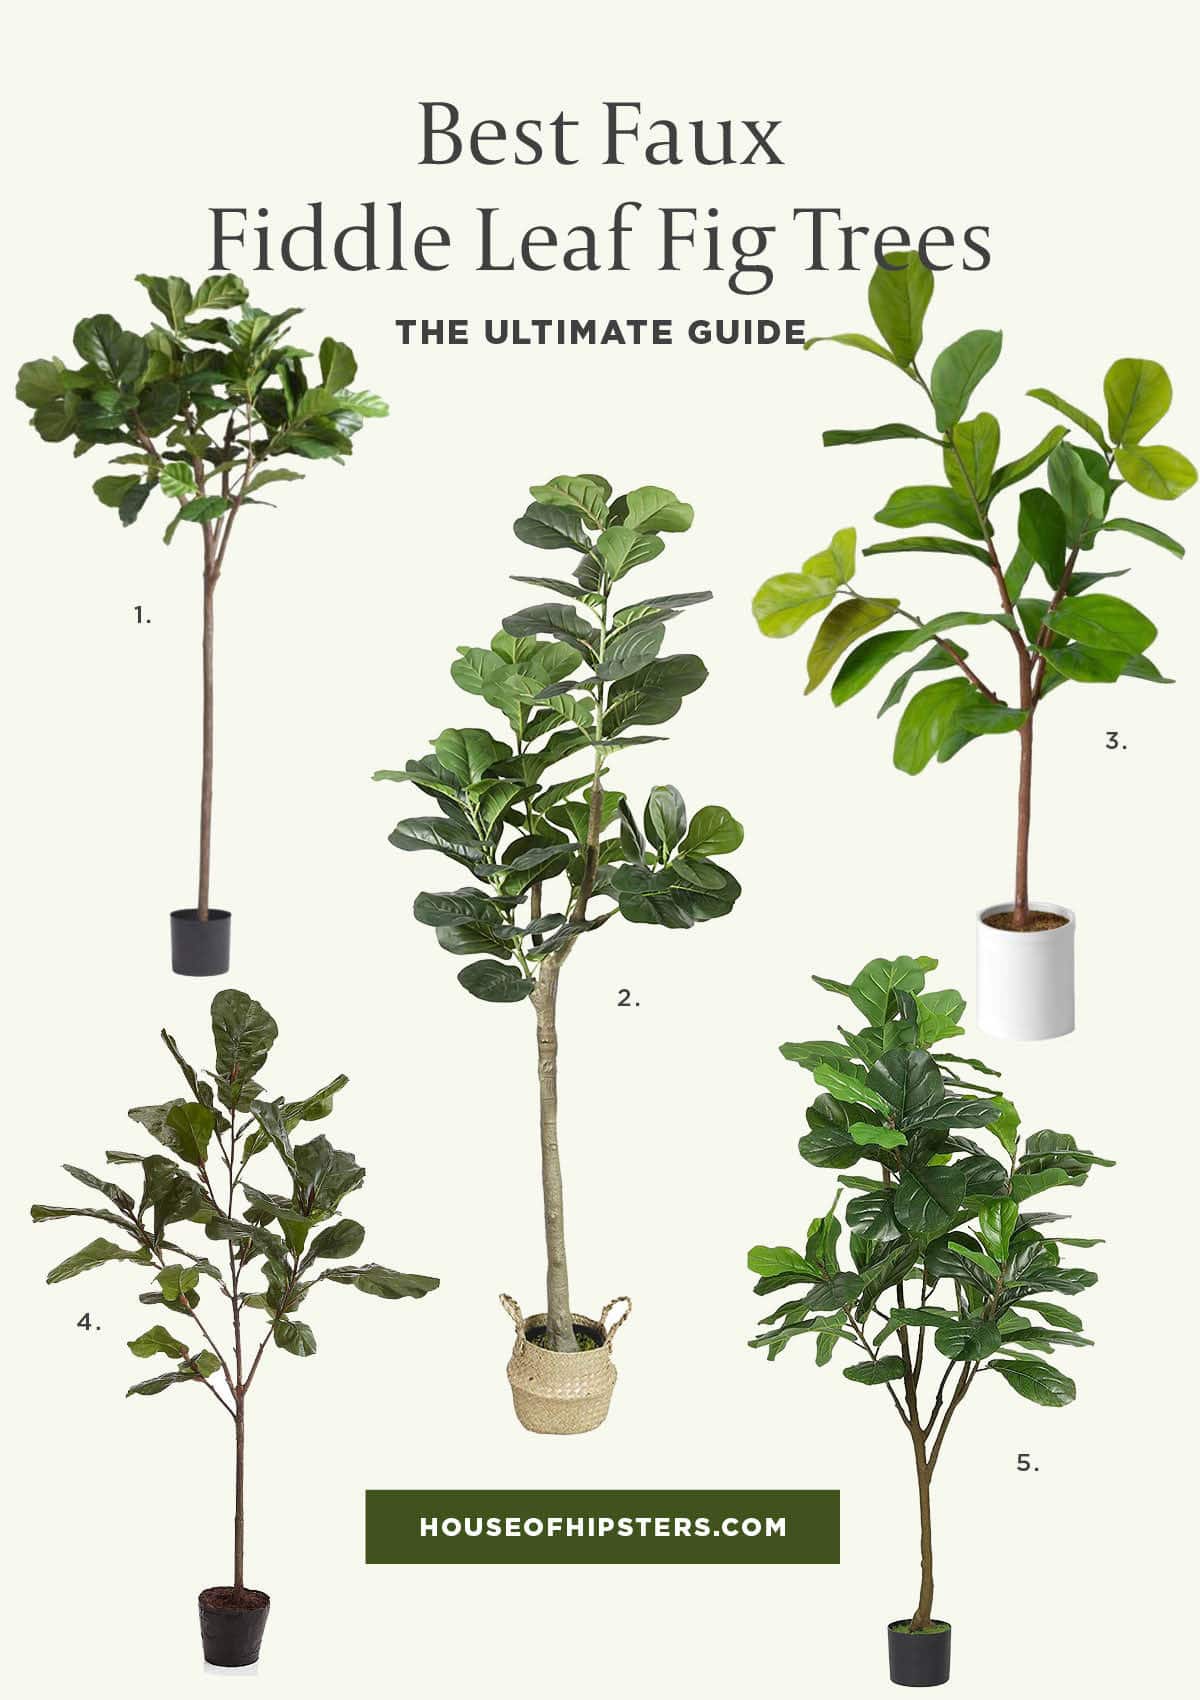 Best Faux Fiddle Leaf Fig Trees - The Complete Guide